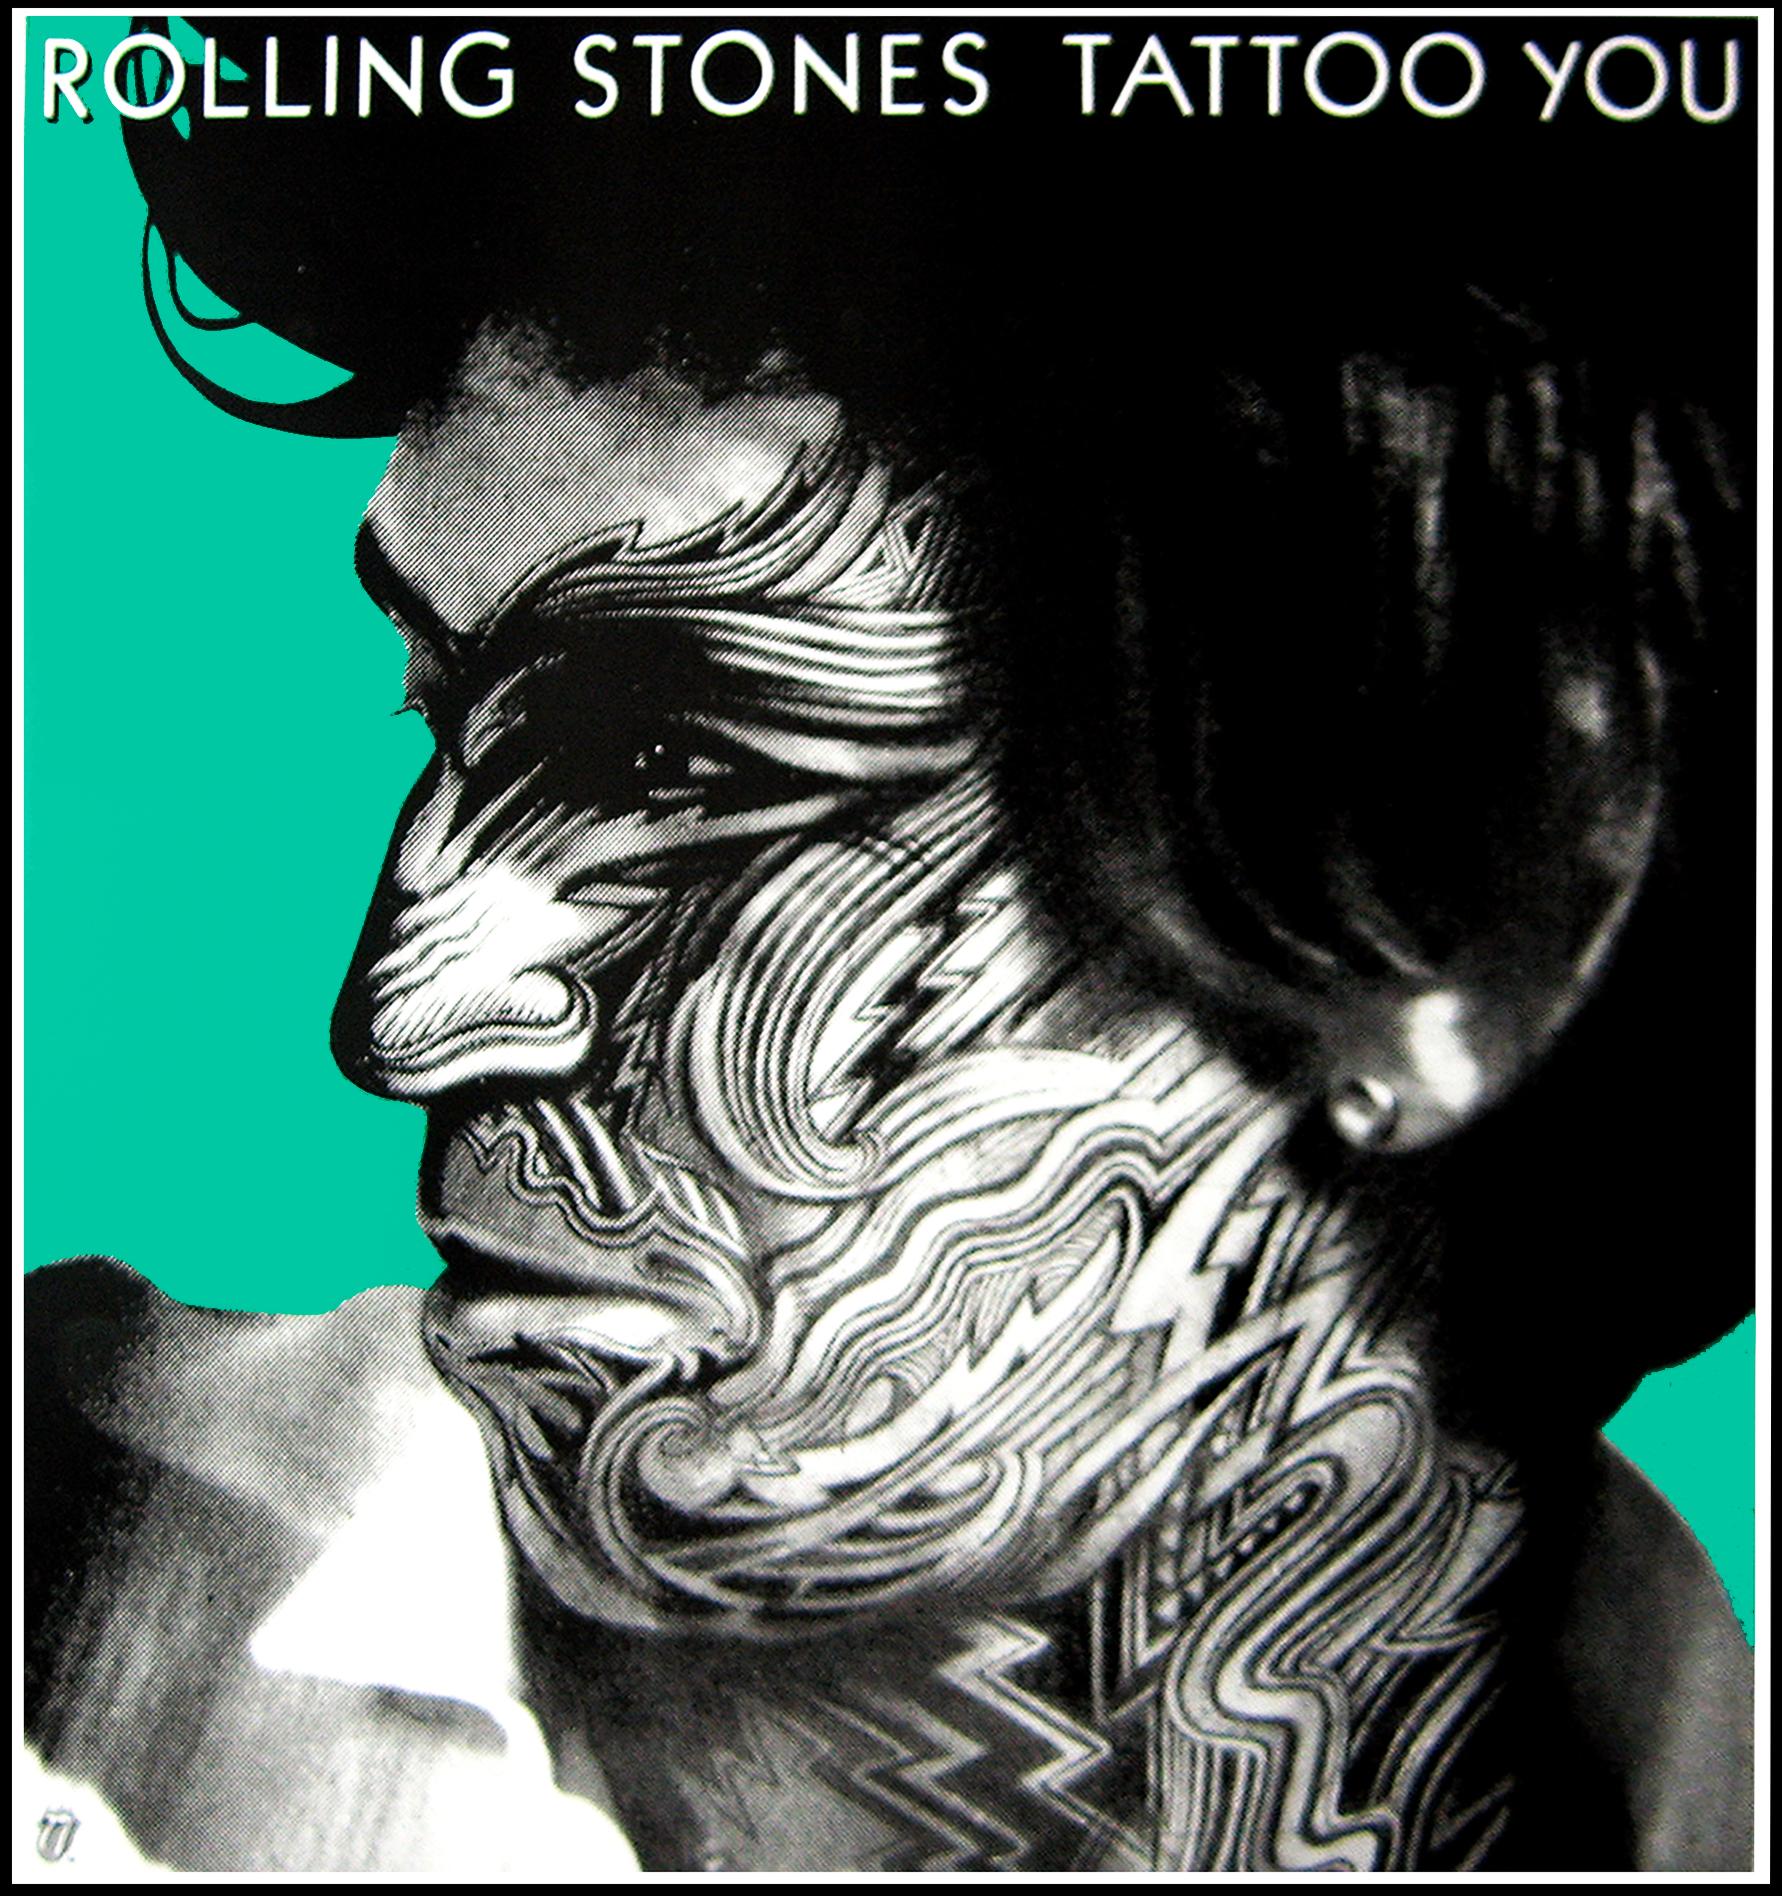 Peter Corriston - "Rolling Stones - Tattoo You (Keith Richards)" Original  Vintage Music Poster at 1stDibs